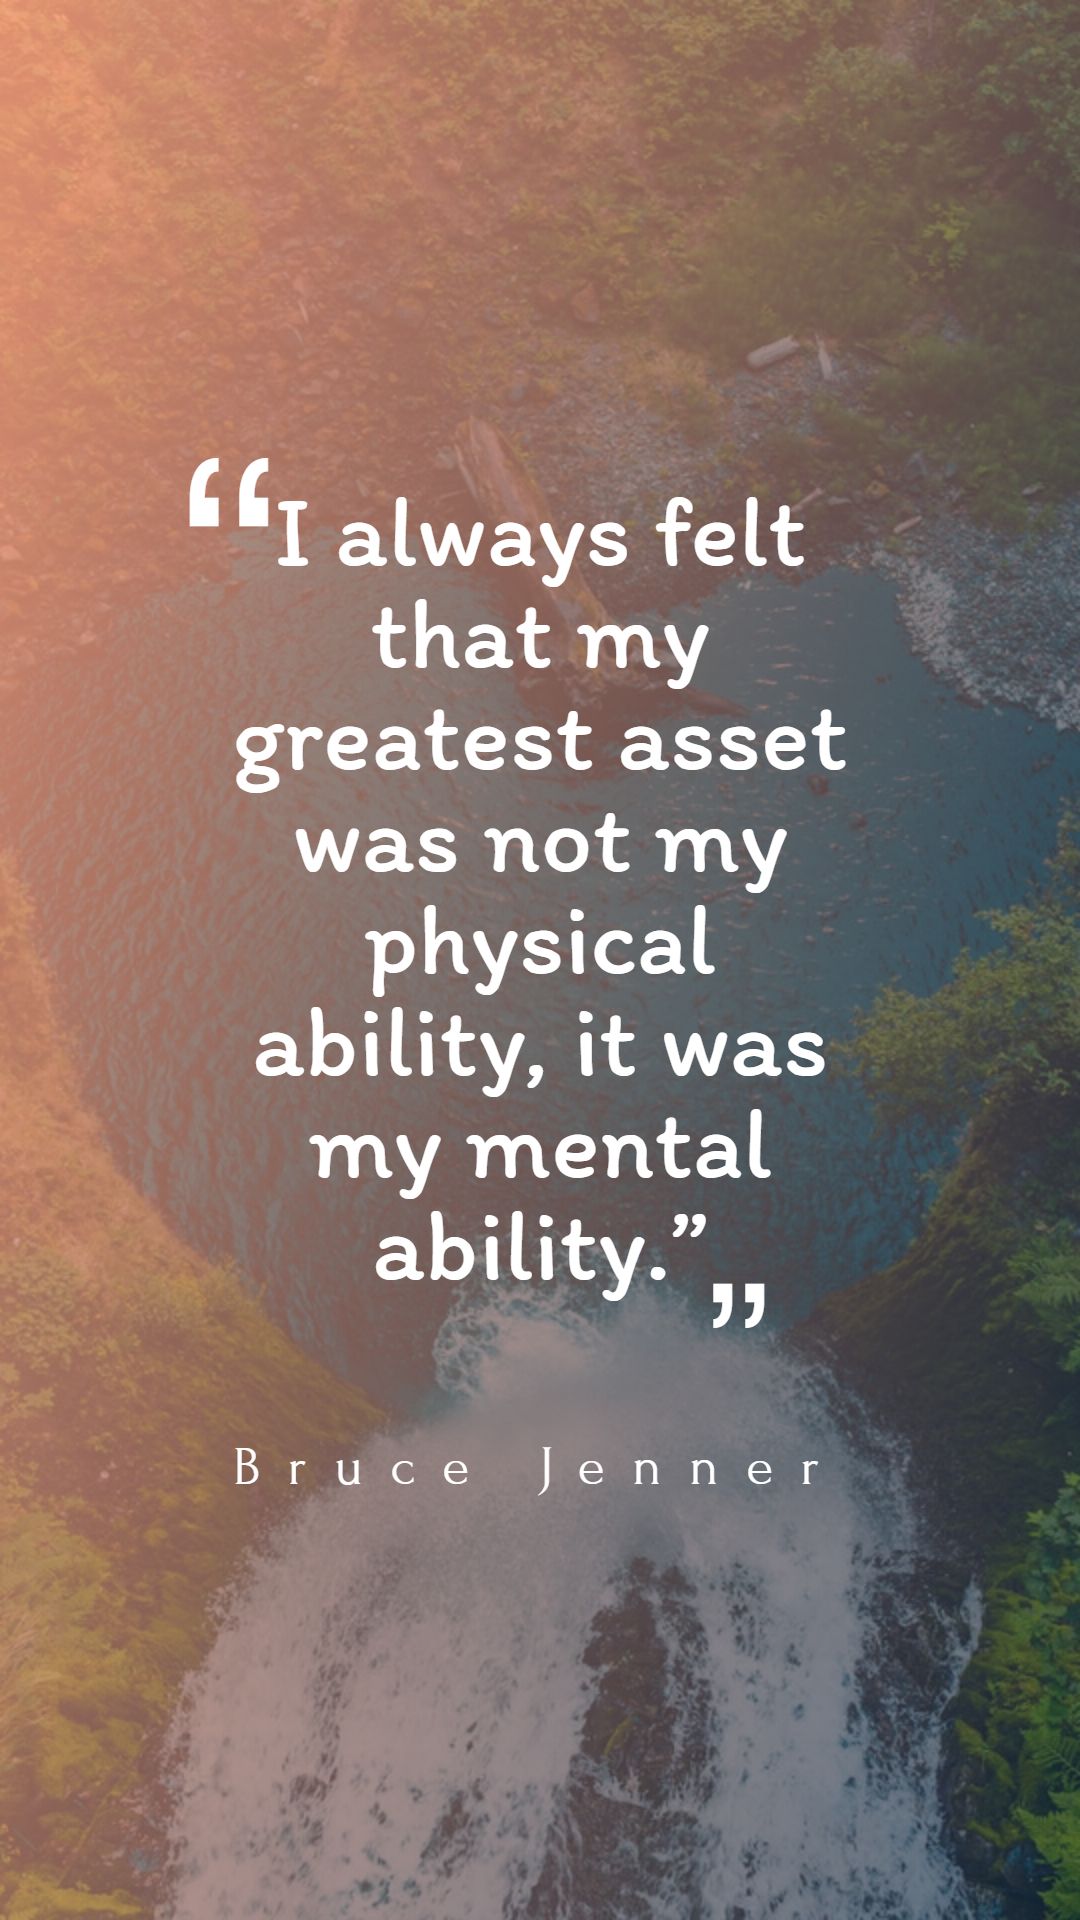 I always felt that my greatest asset was not my physical ability it was my mental ability.”